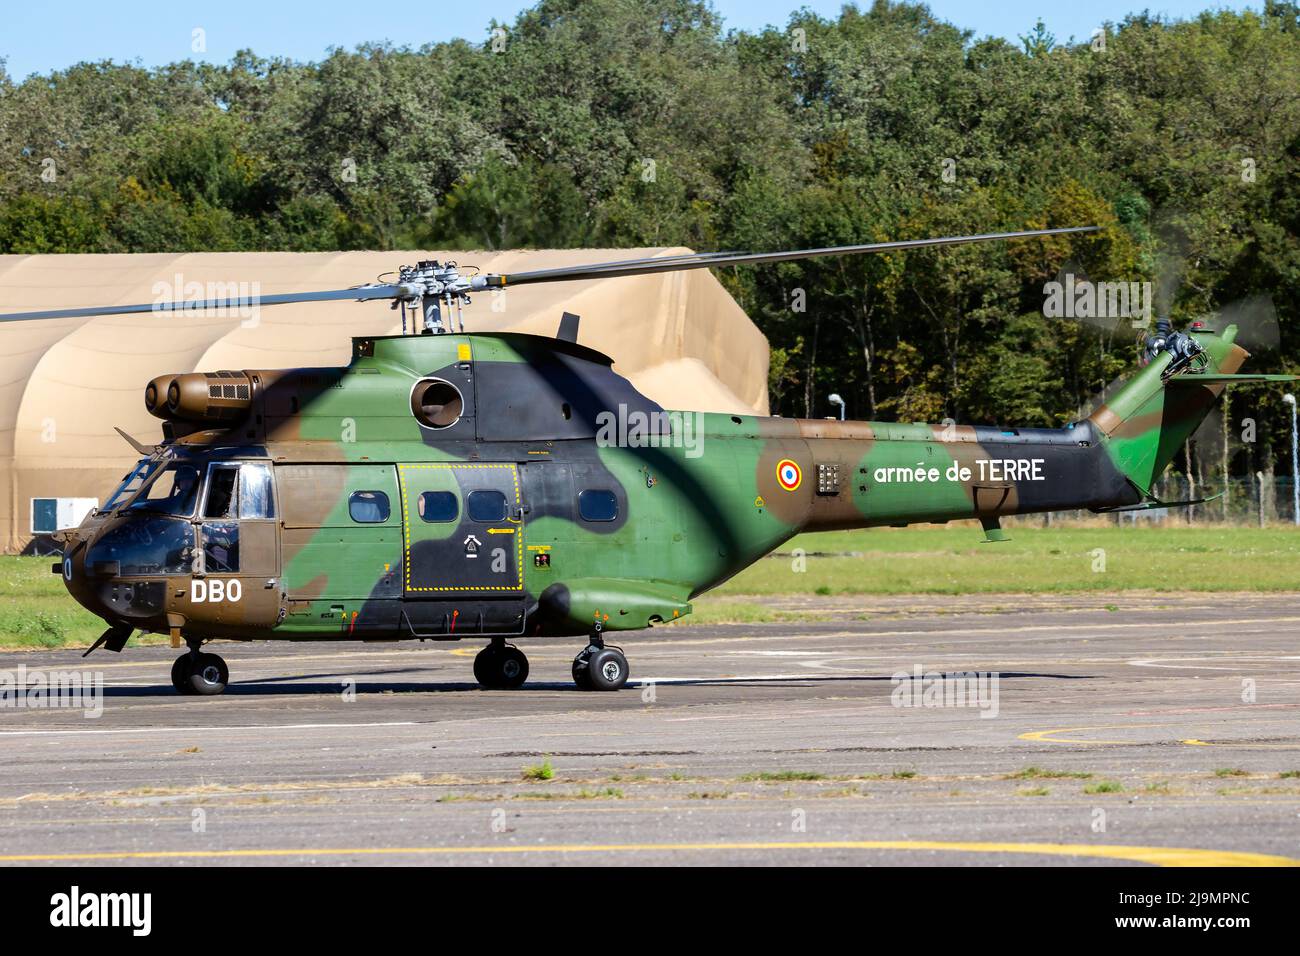 French Army Aerospatiale SA330B Puma helicopter at an airbase in France. August 24, 2016 Stock Photo